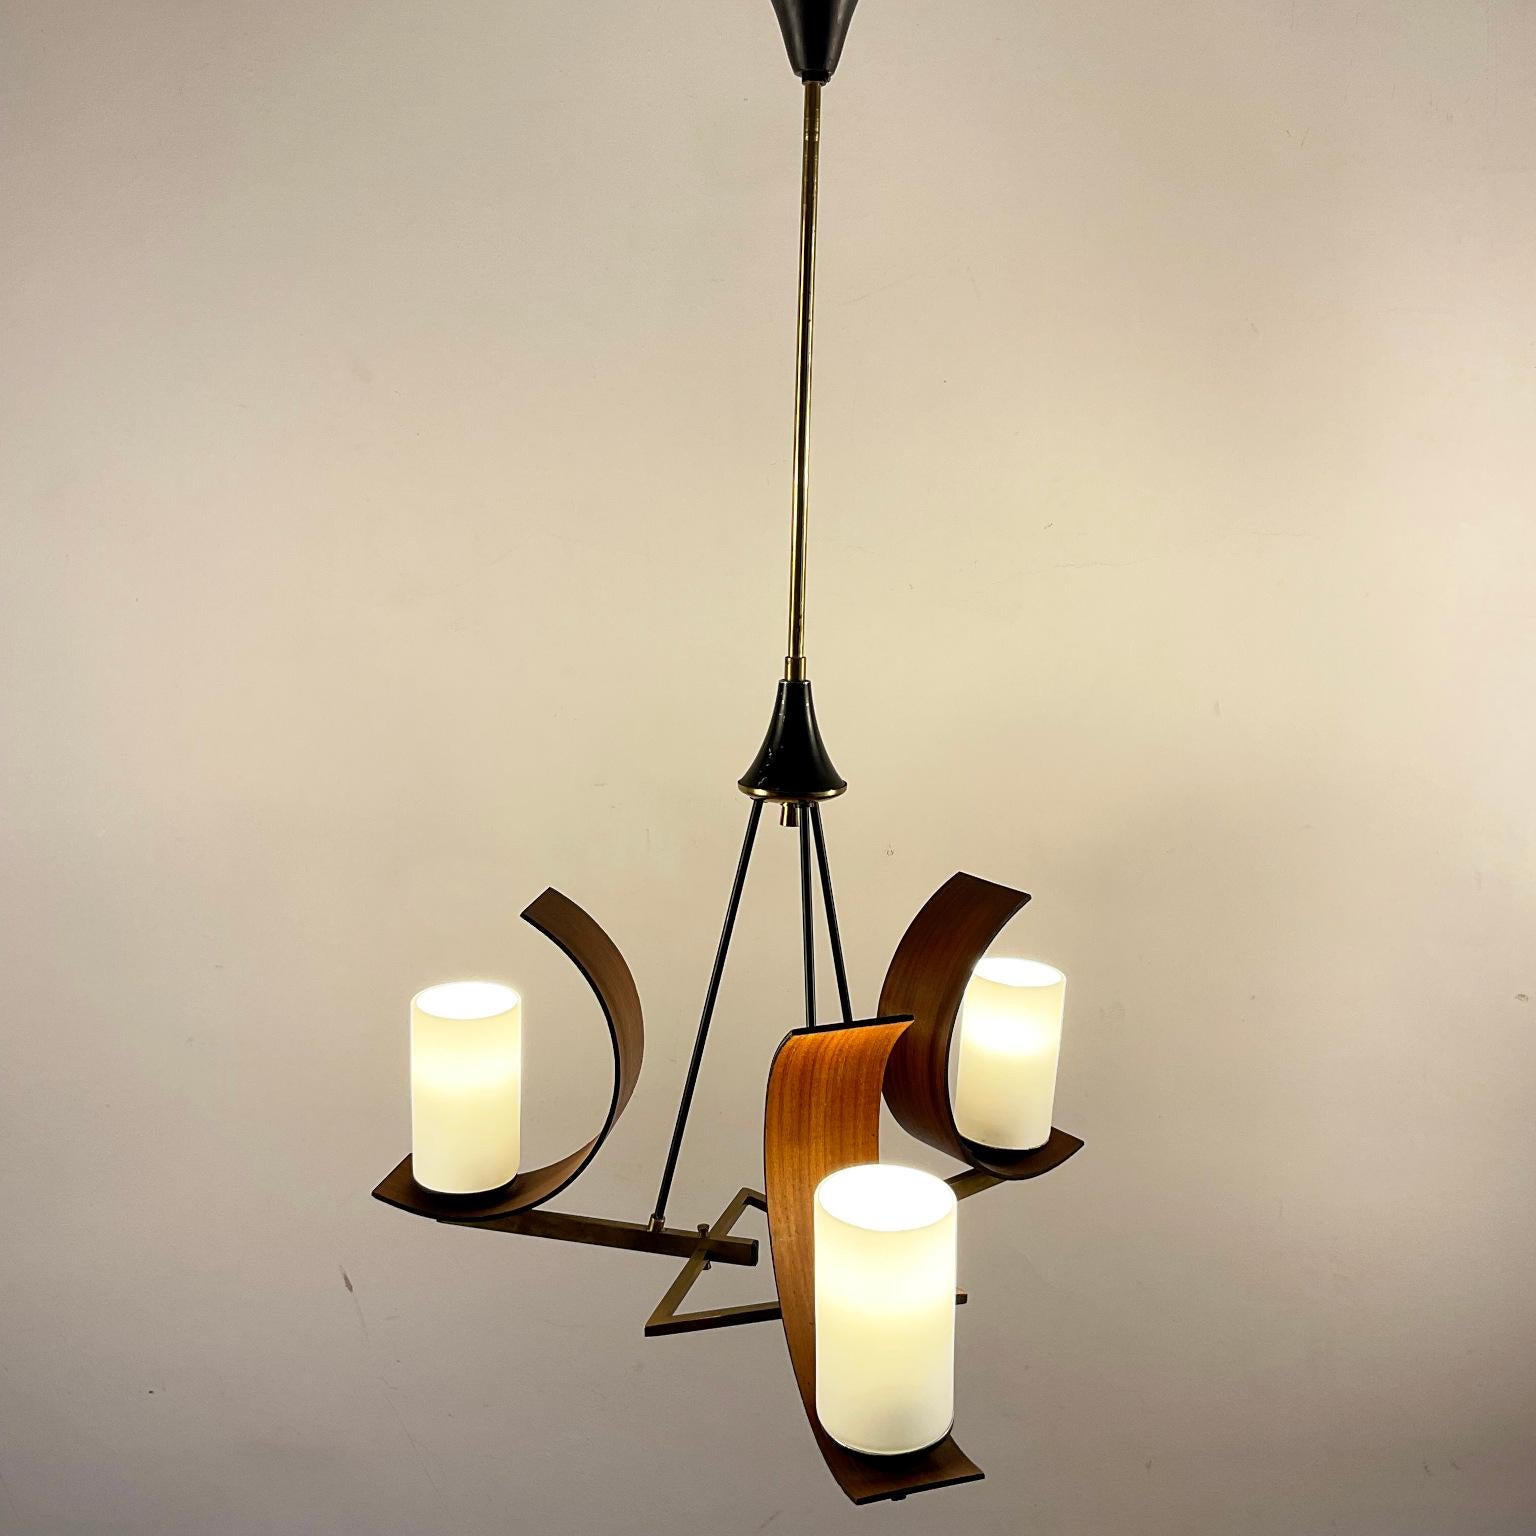 1960s Italian Ceiling Lamp Attributed to Stilnovo with 3 Opaline lampshades 2